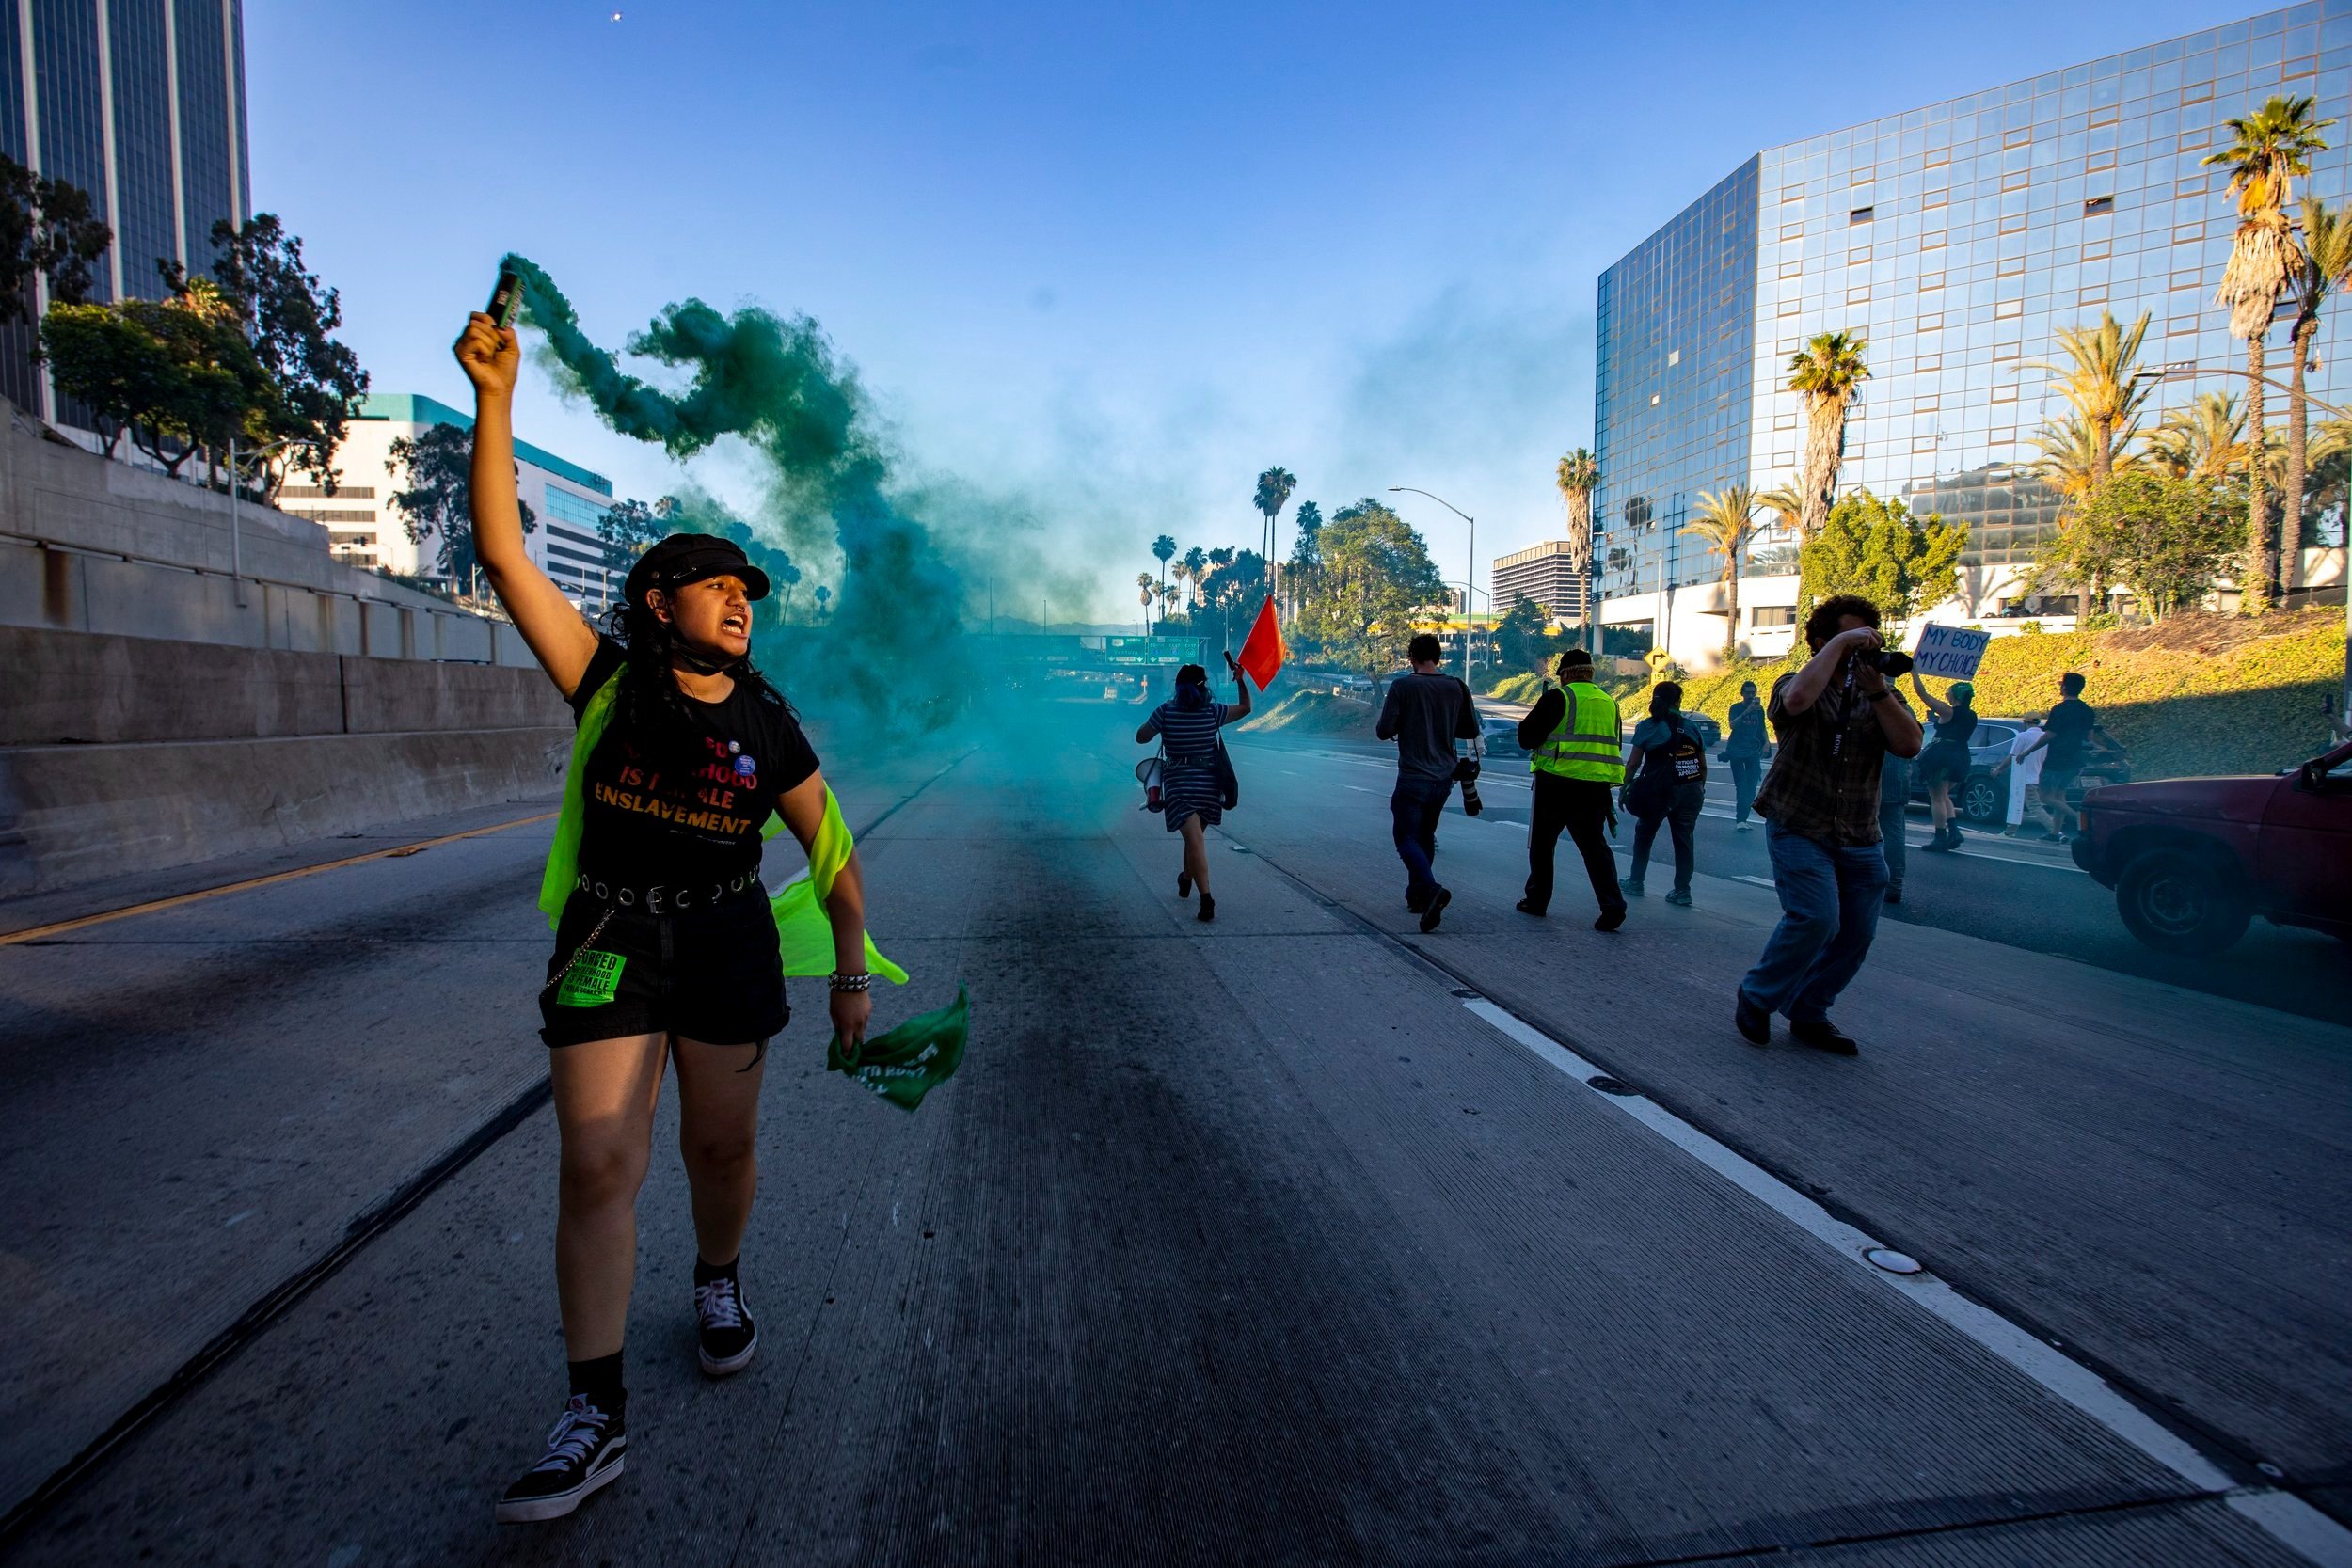  Activists protesting against the Supreme Court's Decision to overturn Roe v. Wade marched onto the 110 Freeway in Downton  Los Angeles. The March was organized by Rise Up 4 Abortion Rights LA. 